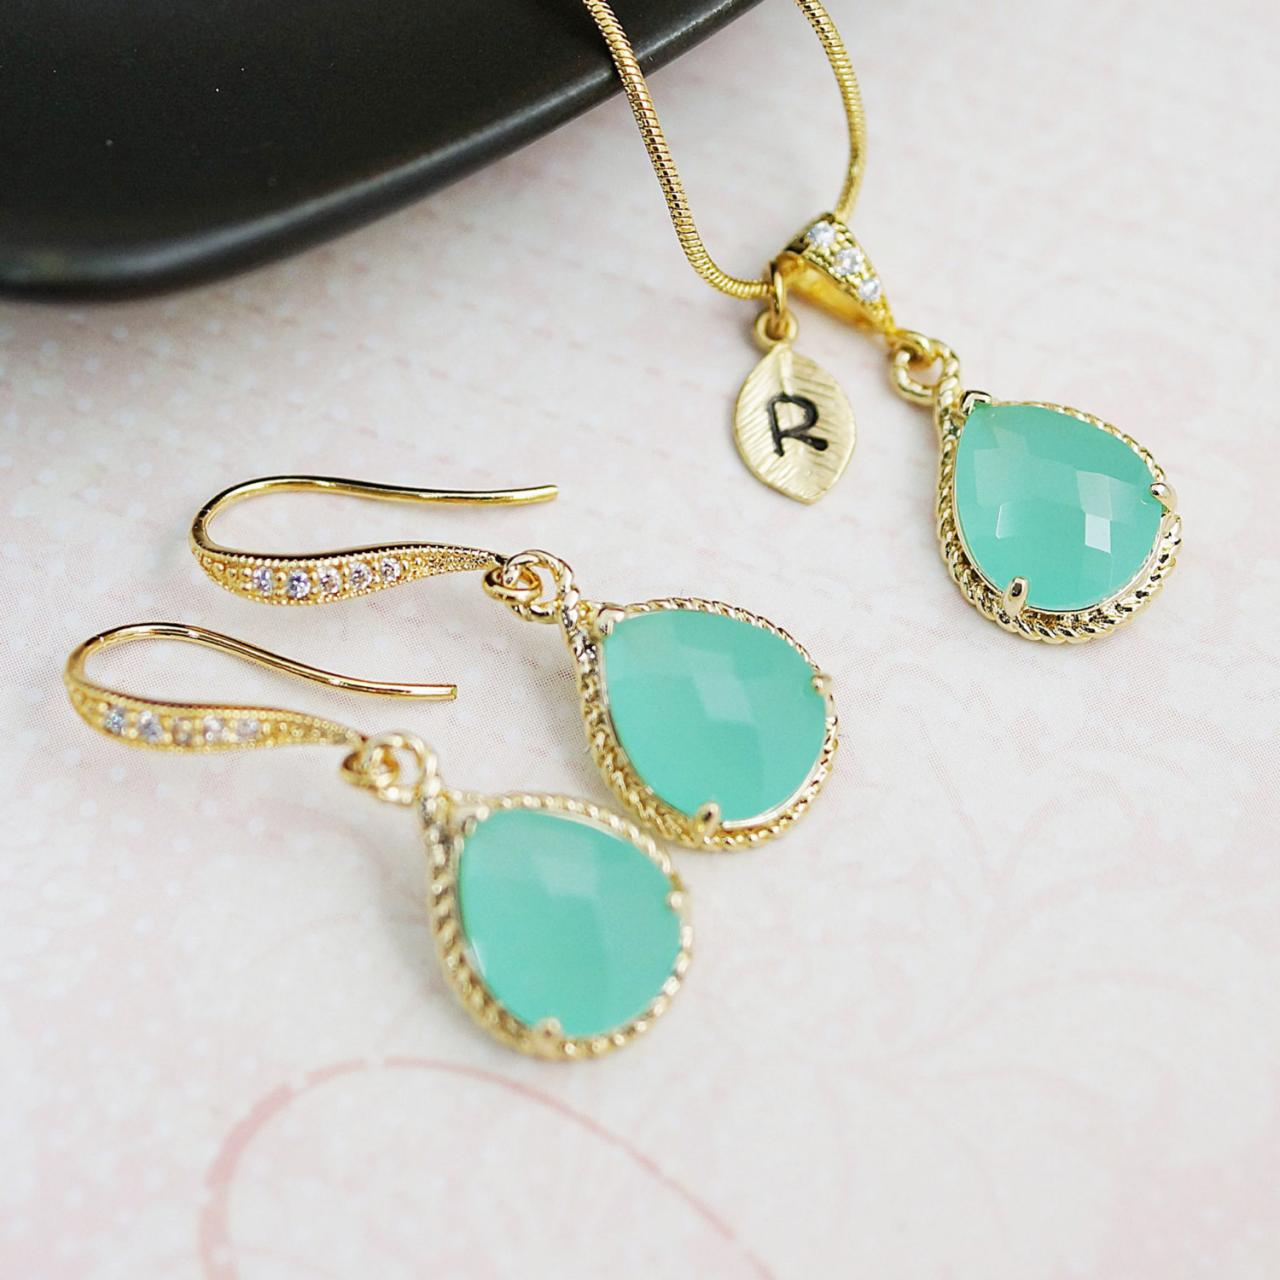 Wedding Jewelry Bridesmaid Gift Bridesmaid Necklace Bridesmaid Jewelry Set Personalized Mint Opal Glass Necklace And Dangle Earrings